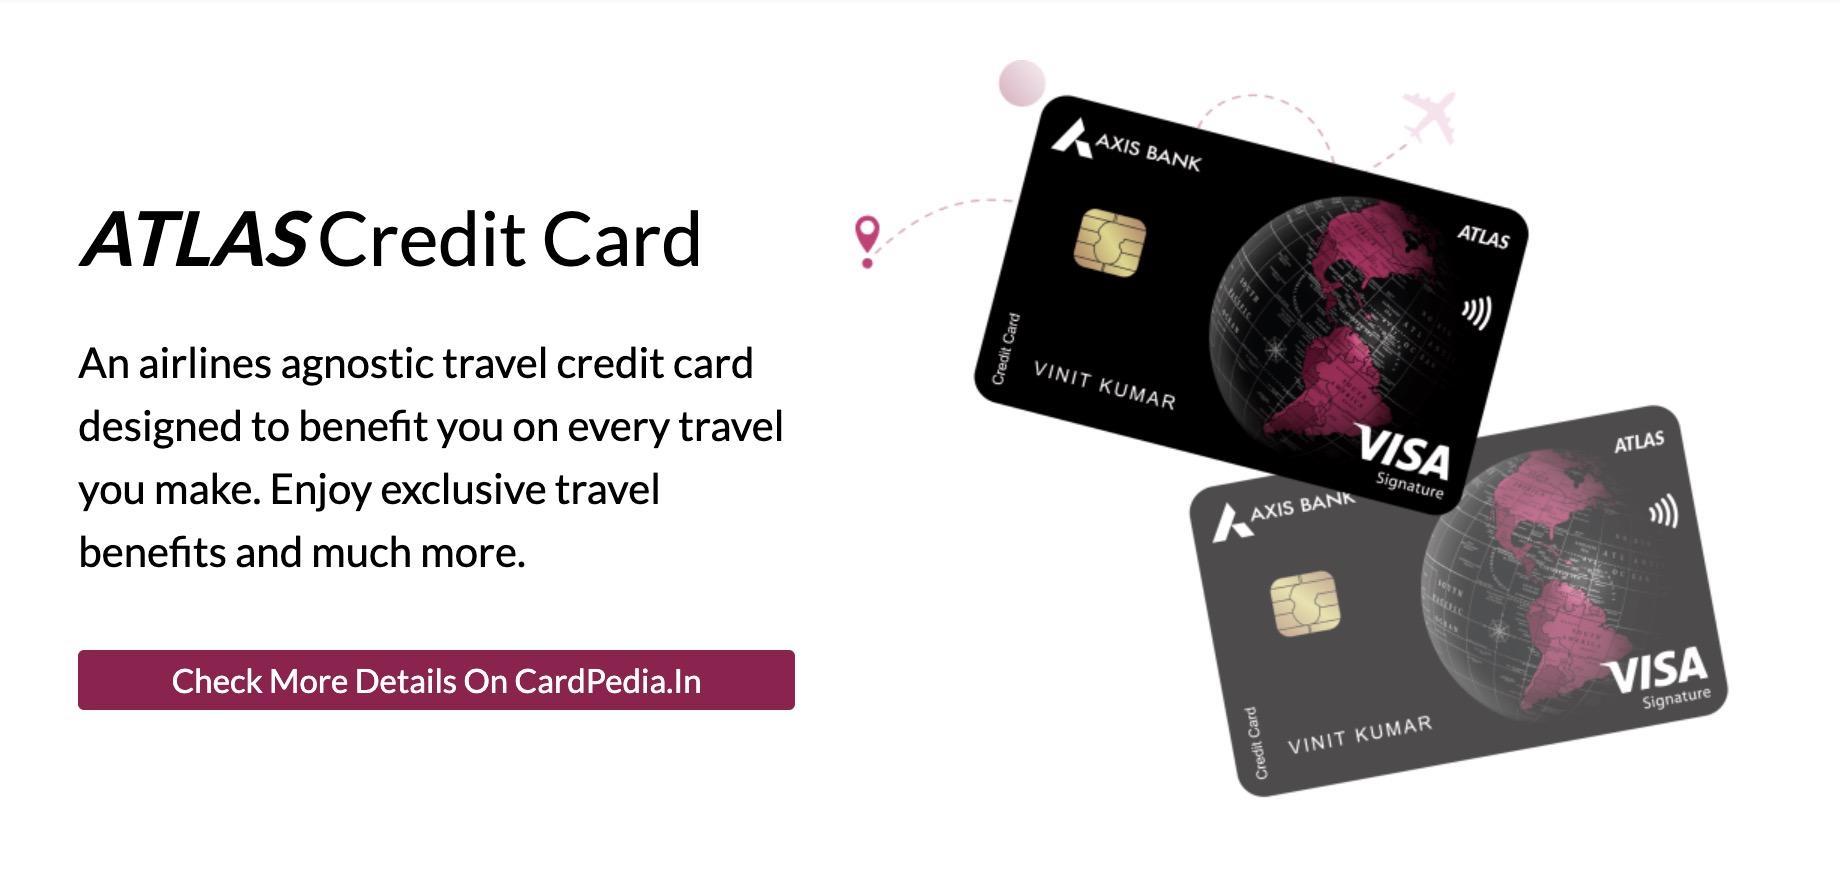 Axis Bank Atlas Credit Card Review with 5 Best Premium Benefits